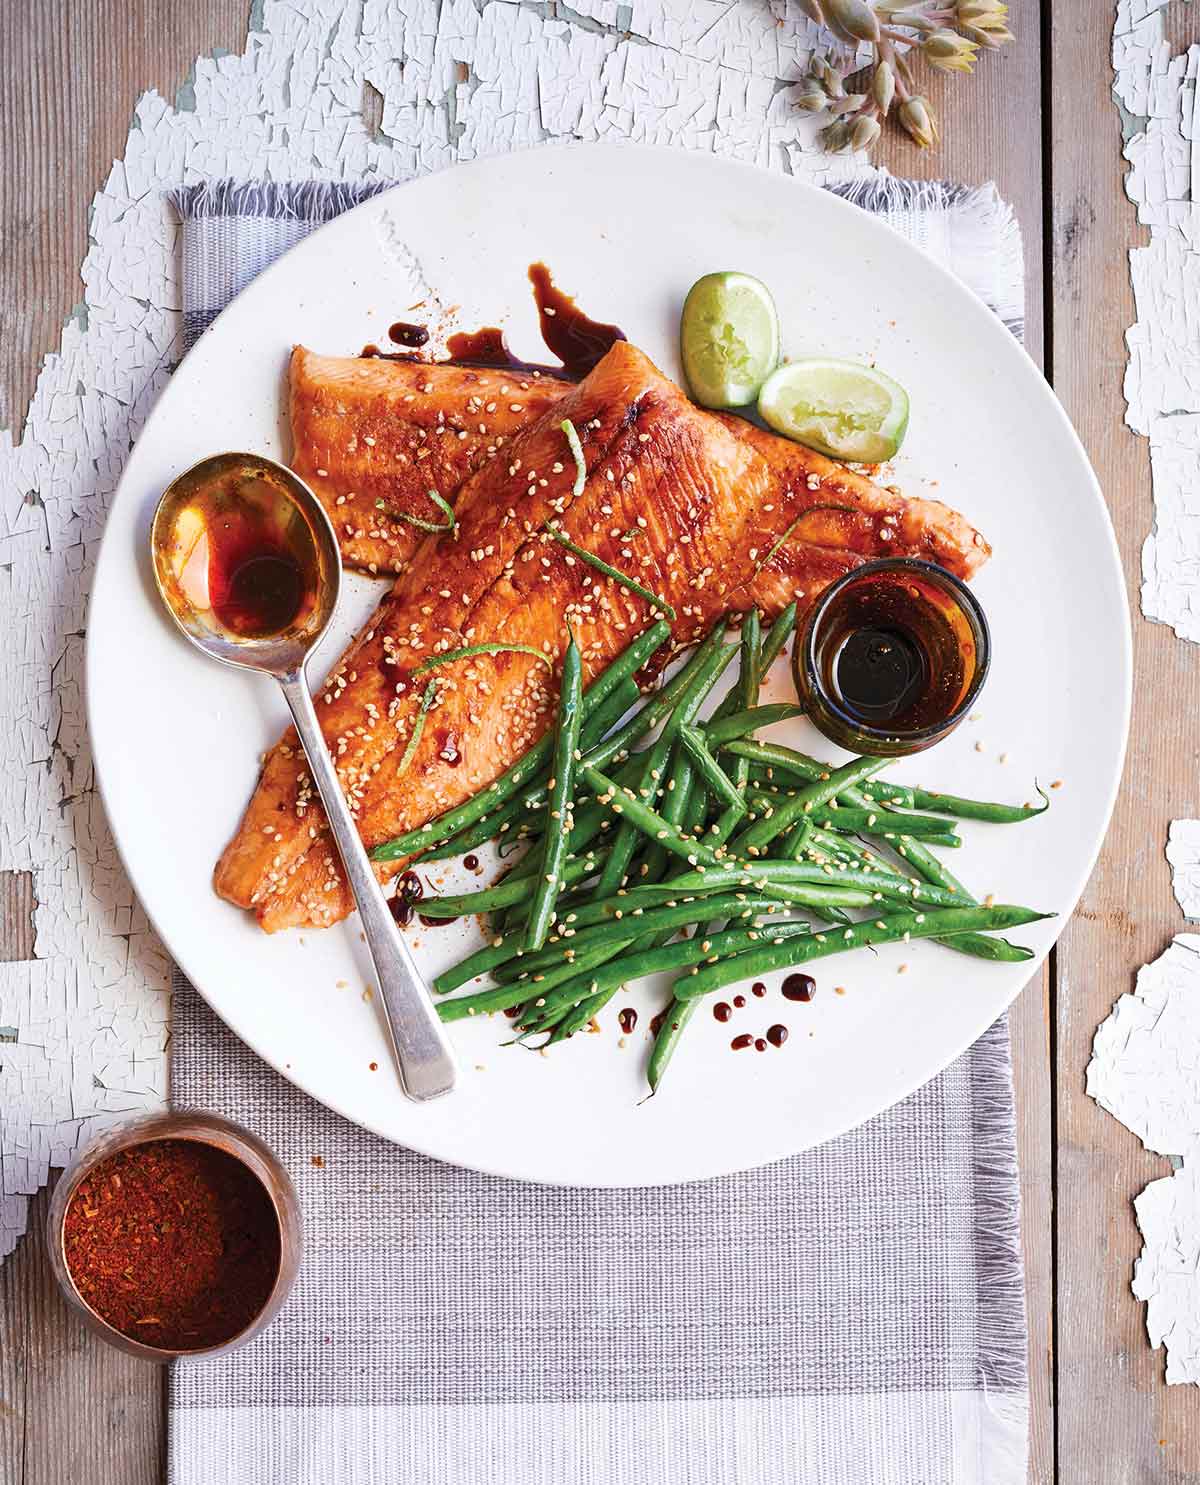 A weathered wood table with a white plate, filled with 2 honey-soy covered trout, green beans, lime quarters, a pot of glaze and a large spoon.